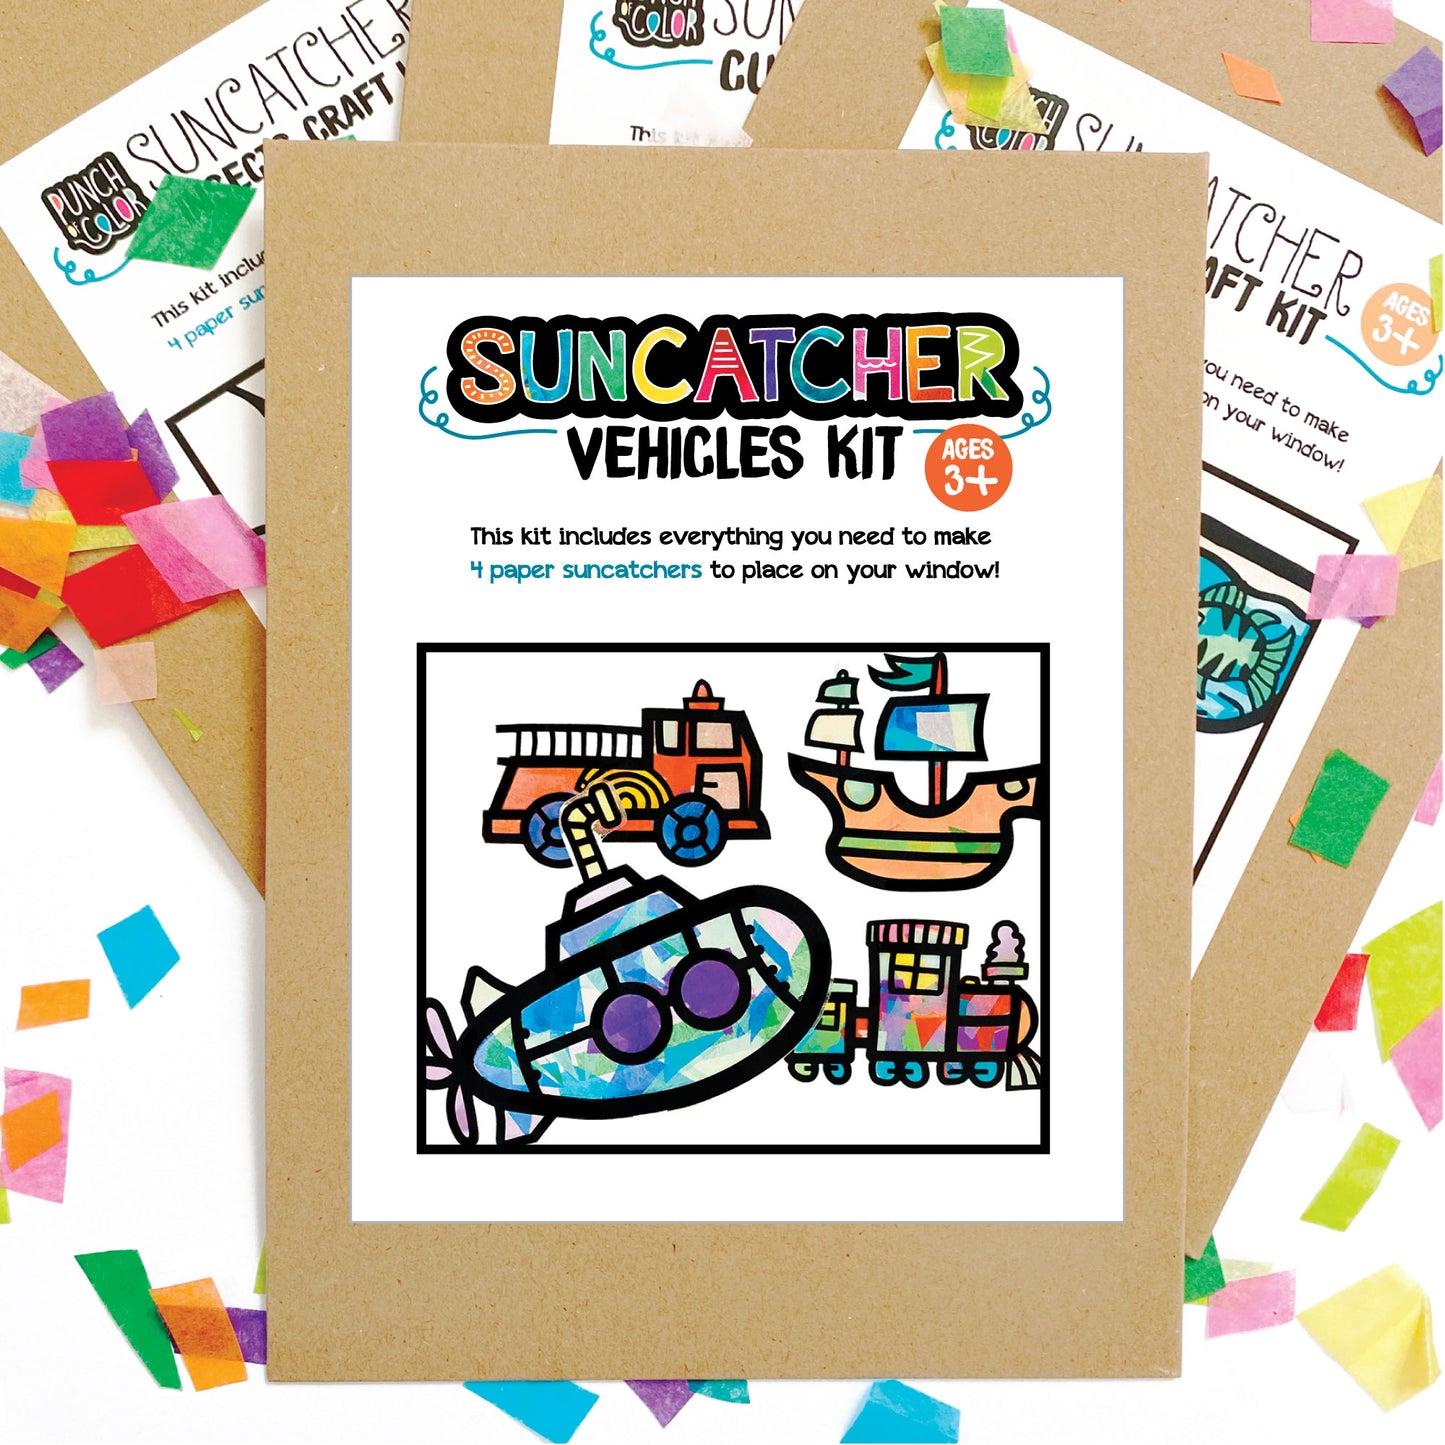 Vehicles suncatcher arts and crafts kit for kids